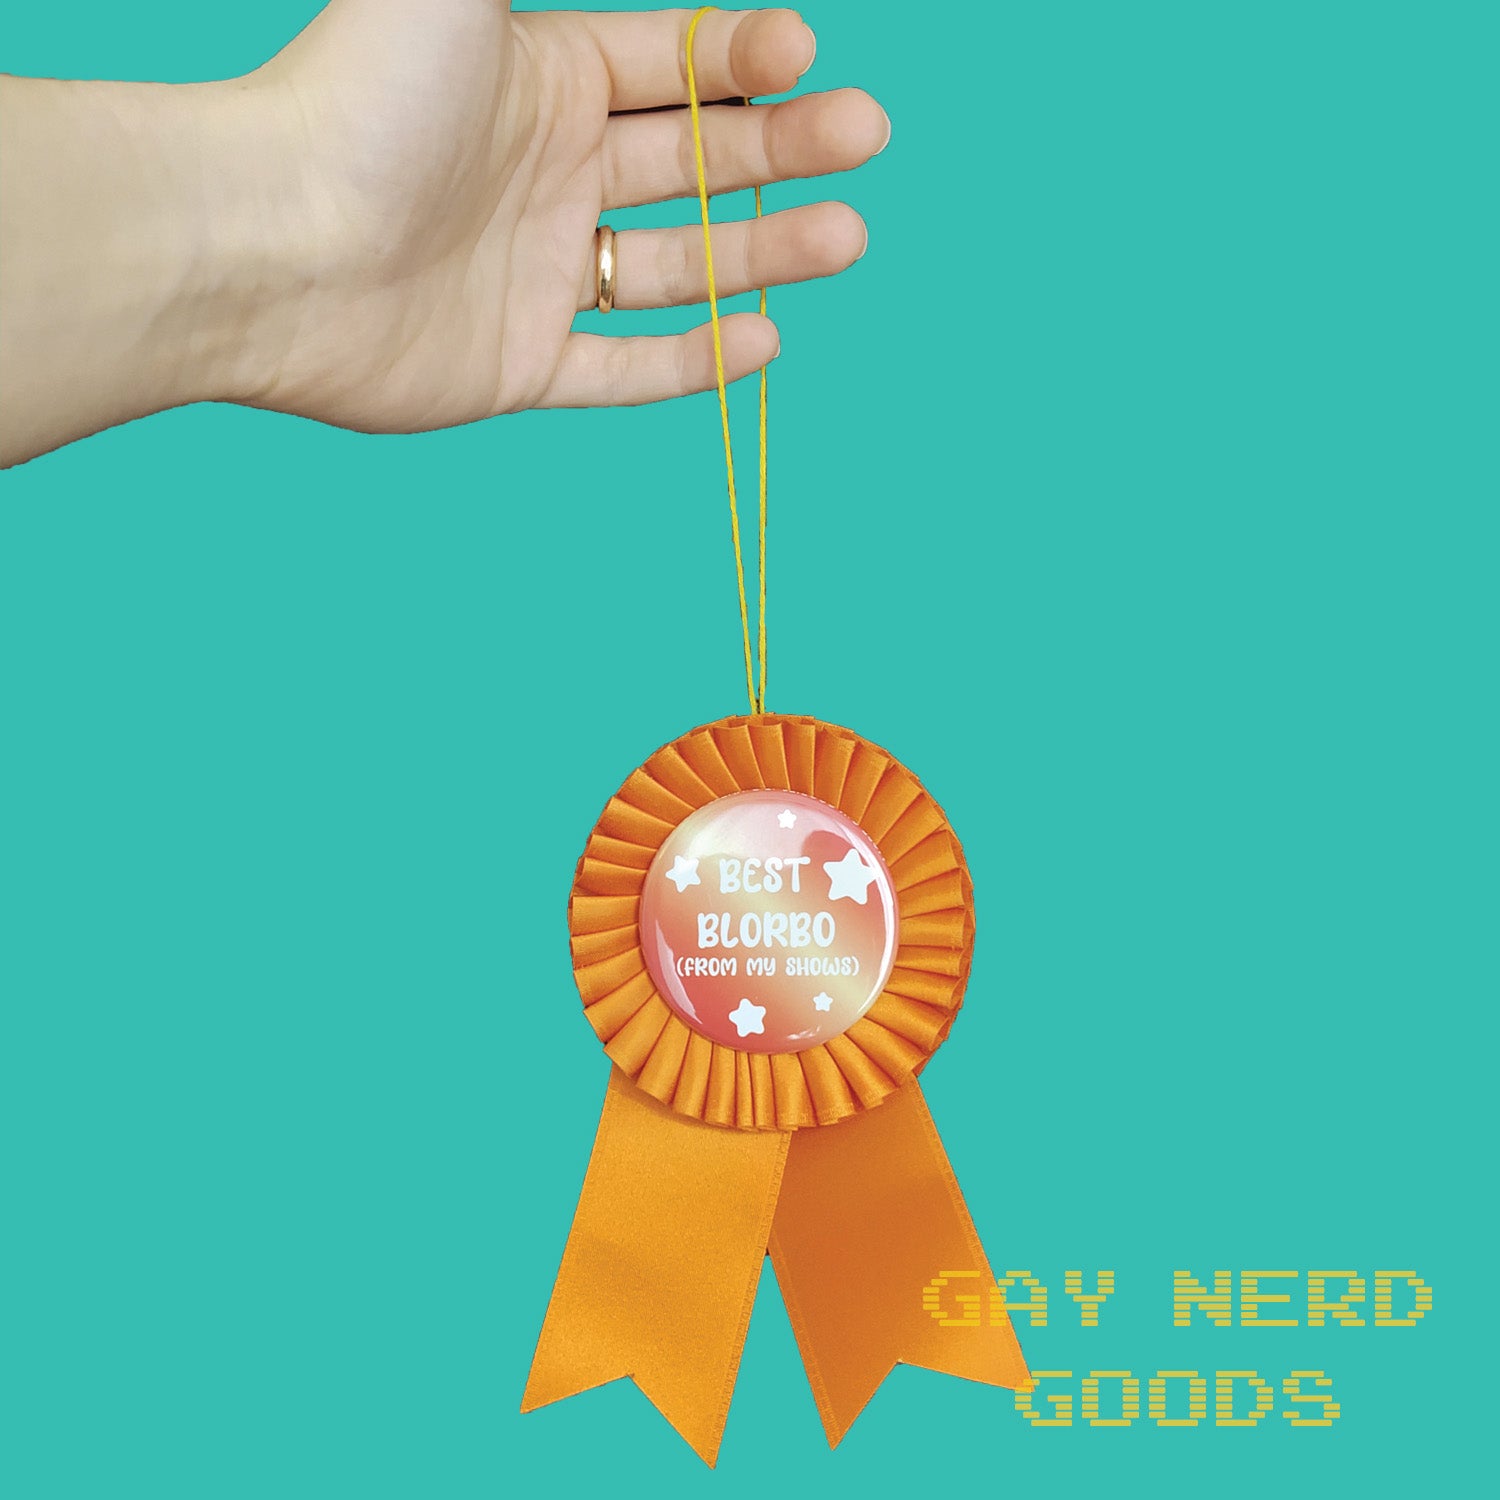 best blorbo award ribbon hanging by a yellow thread held in a hand